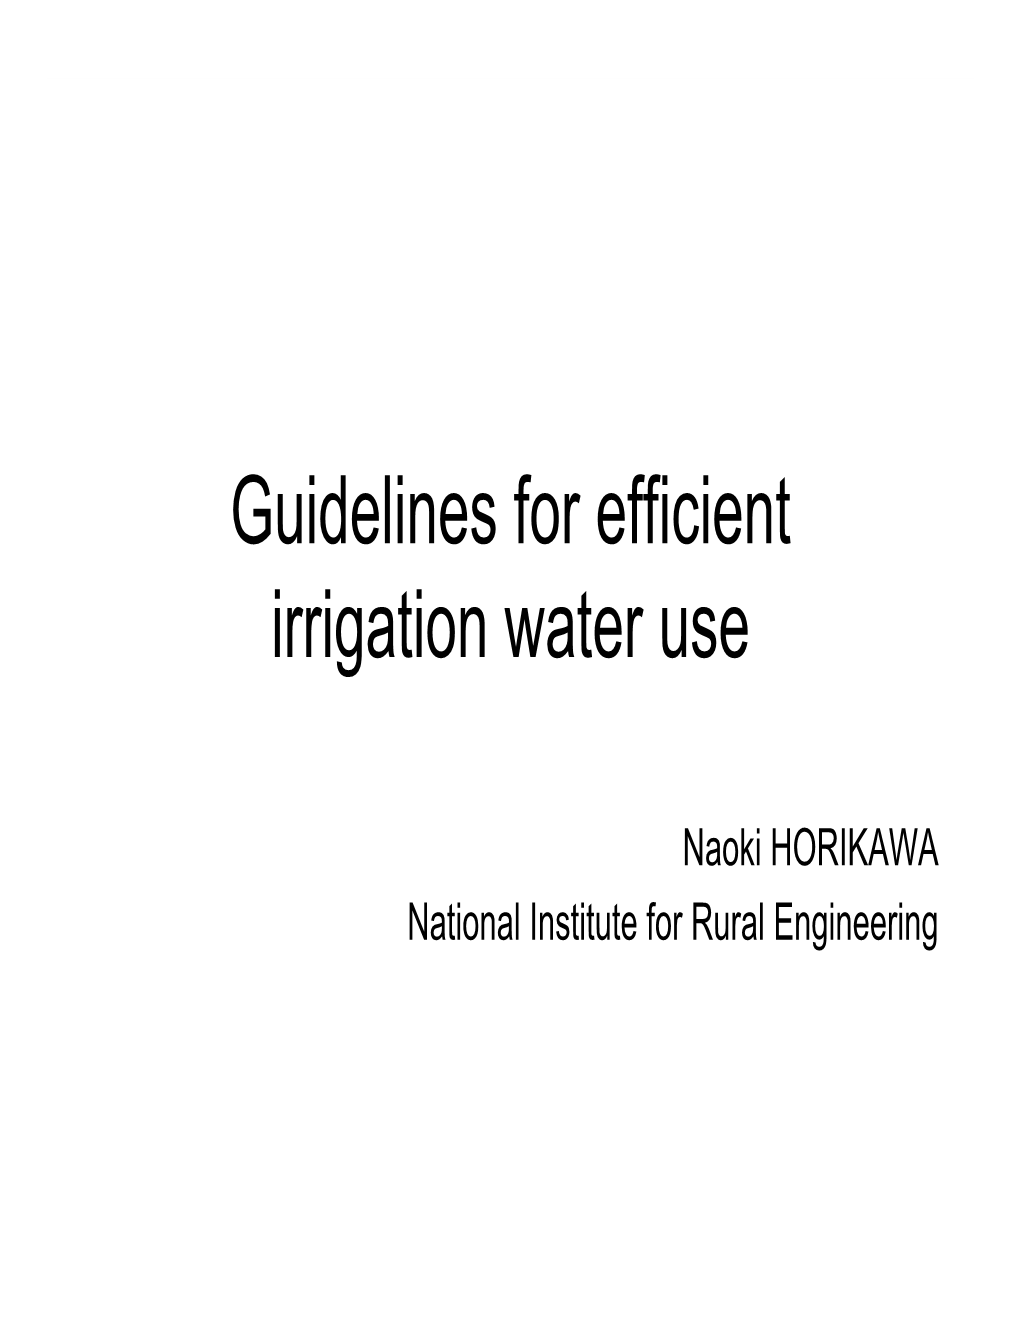 Guidelines for Efficient Irrigation Water Use